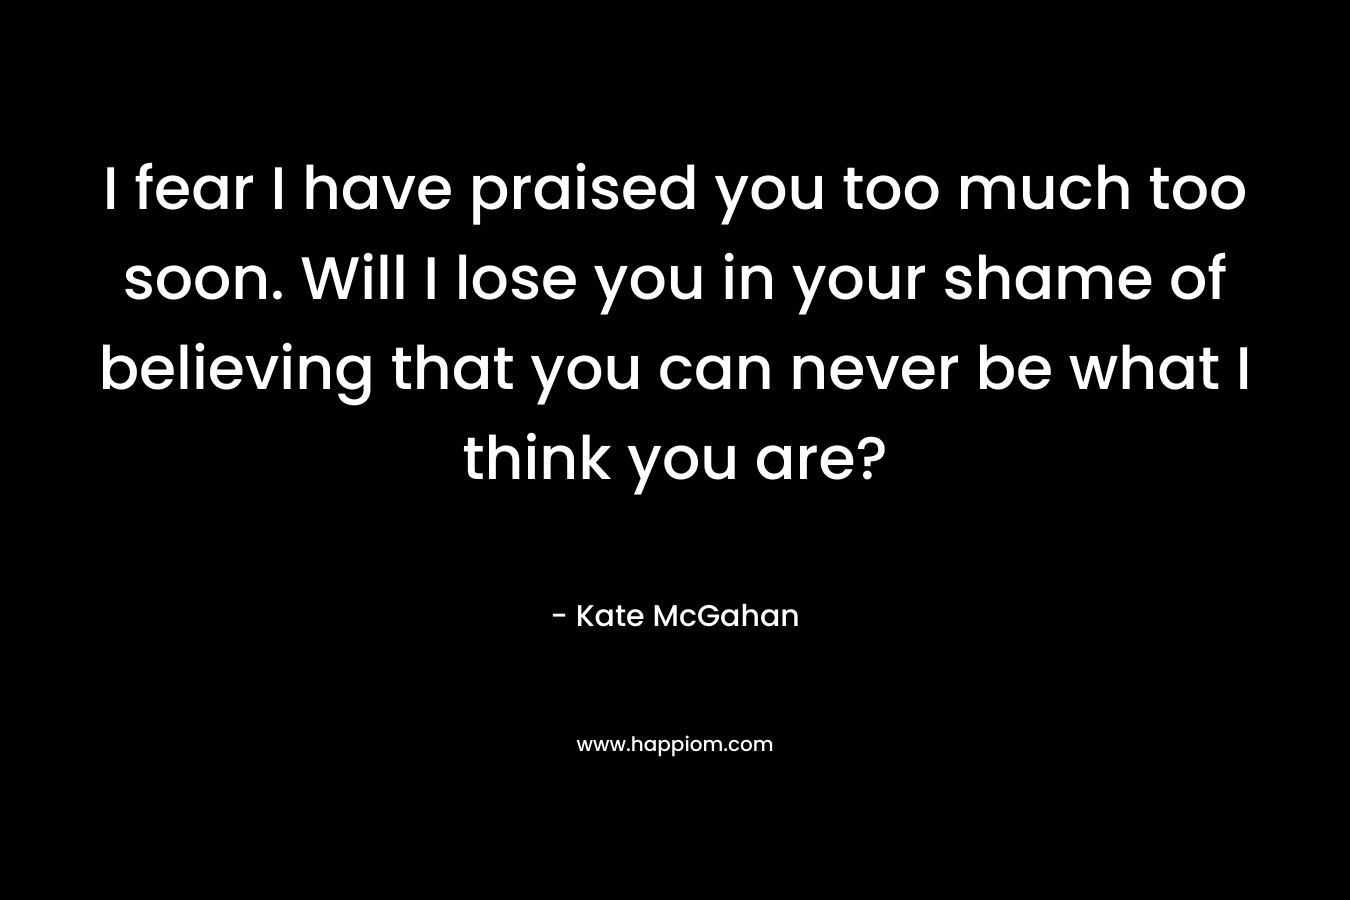 I fear I have praised you too much too soon. Will I lose you in your shame of believing that you can never be what I think you are? – Kate McGahan